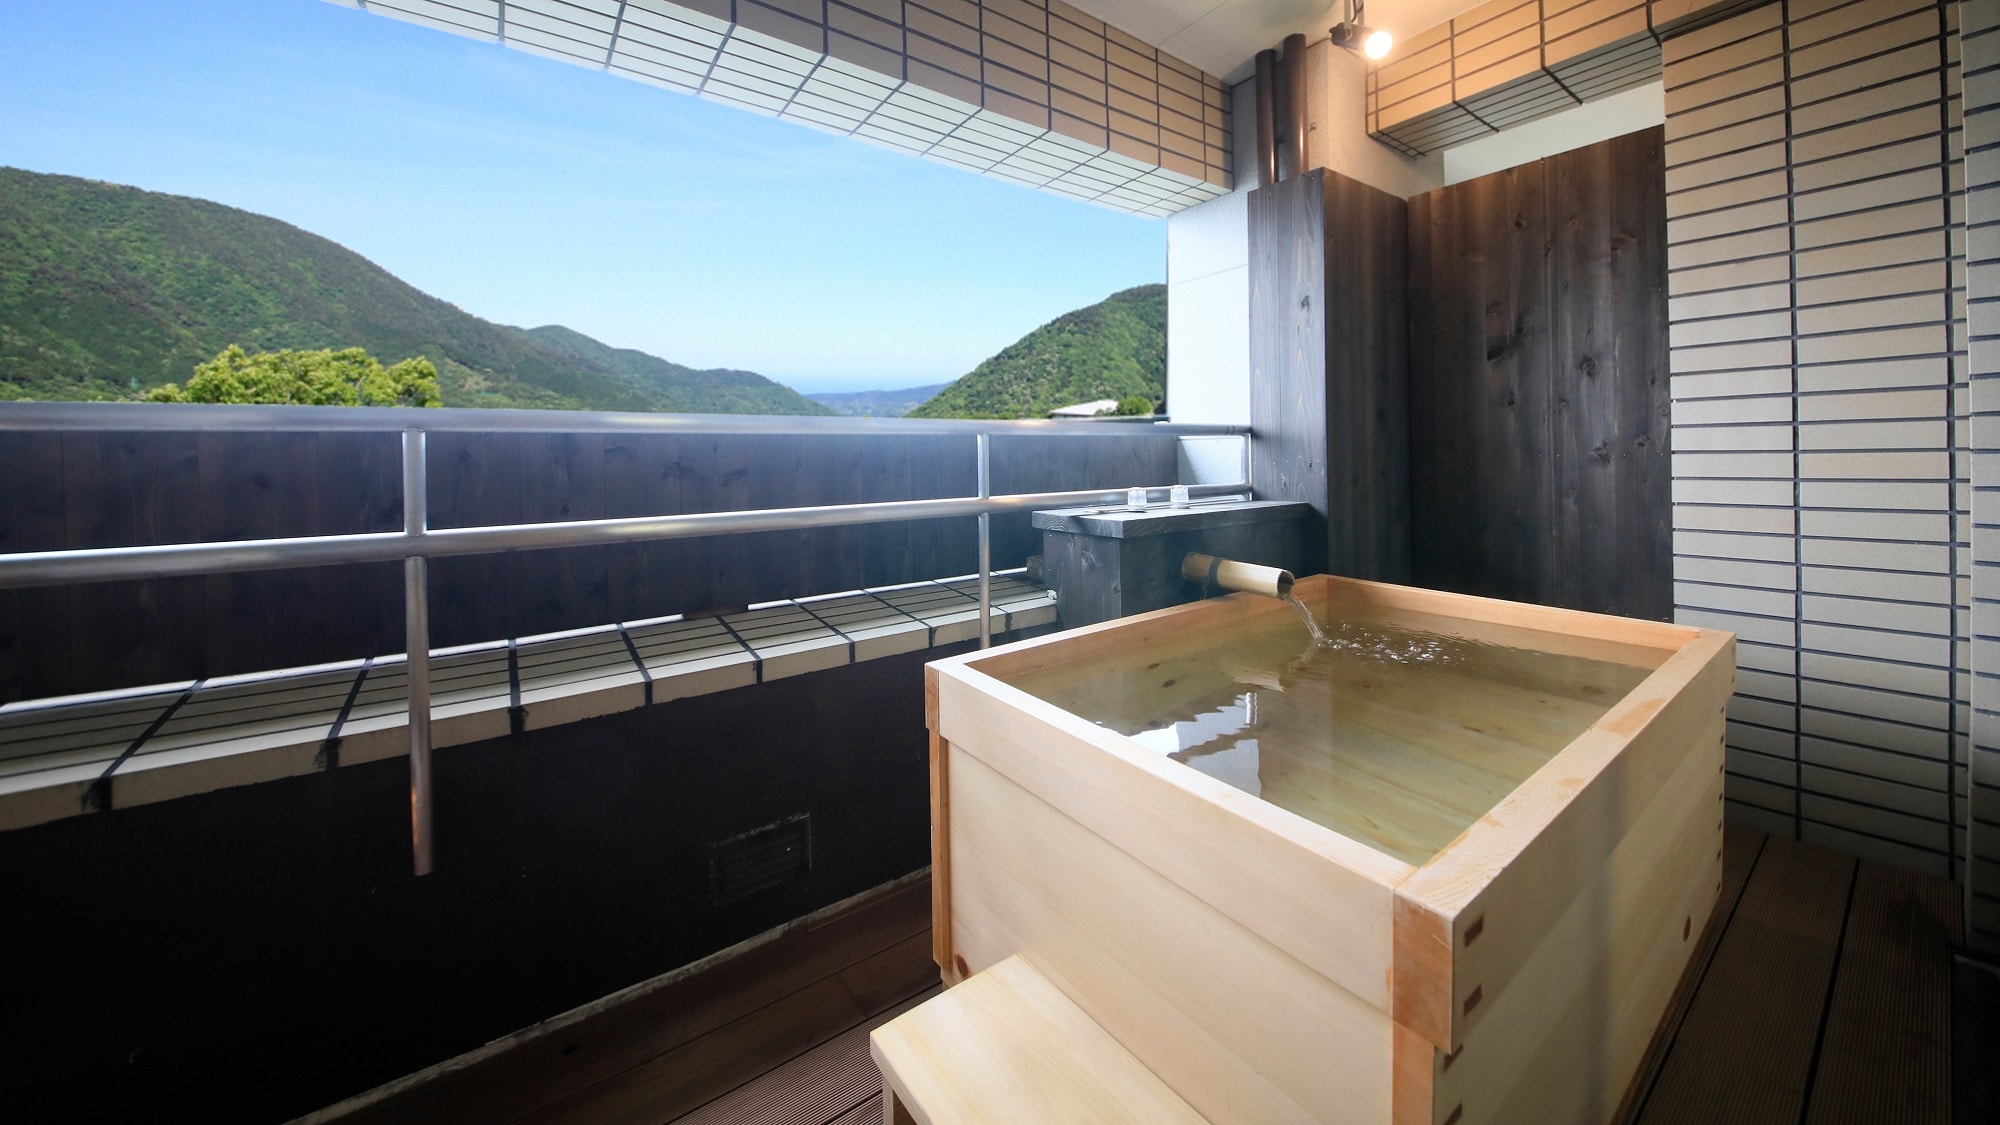 Suite room with open-air bath